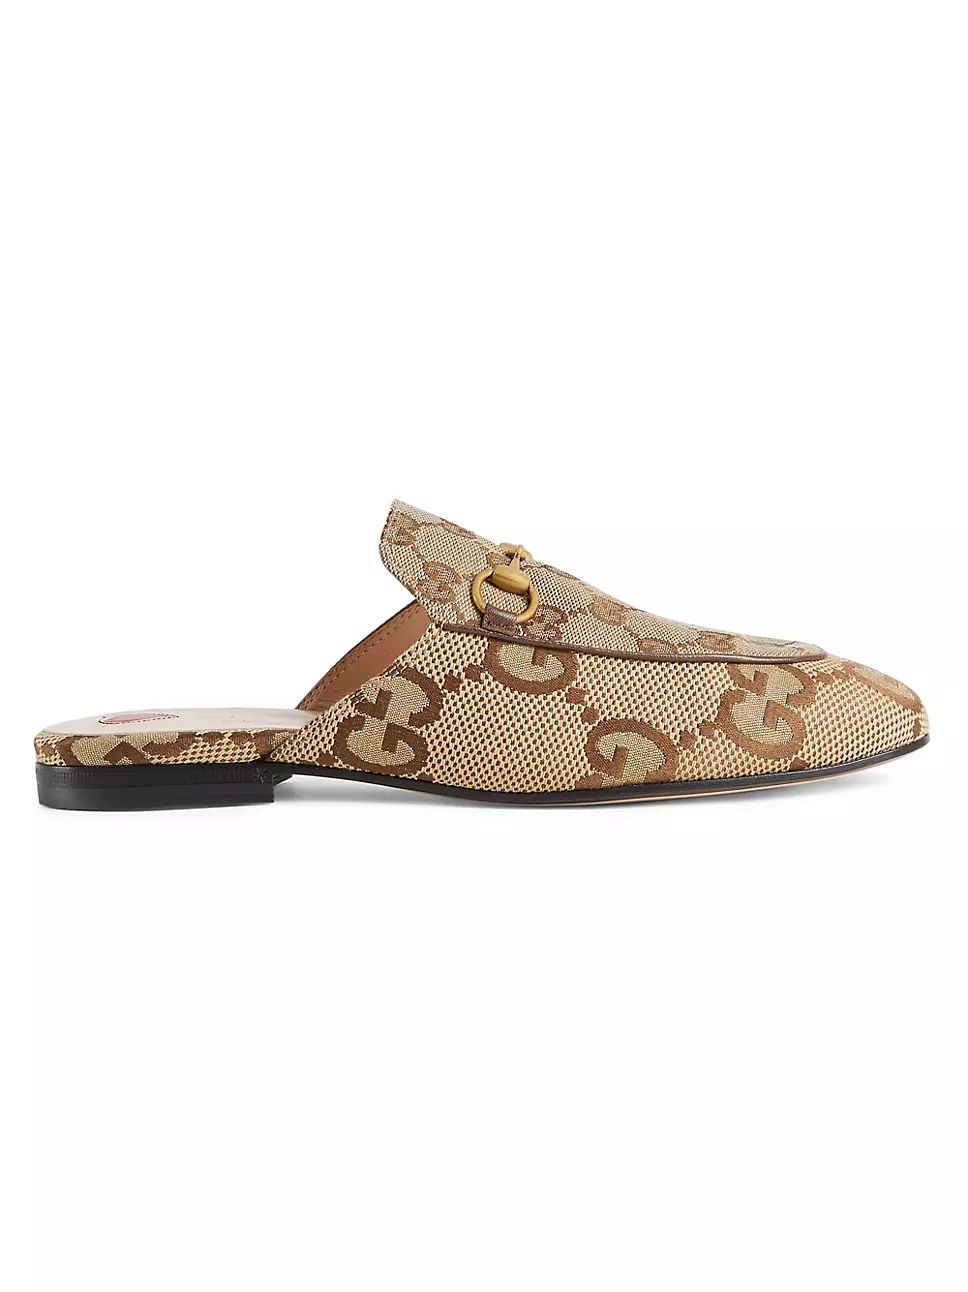 Gucci Princetown Canvas Slippers | Saks Fifth Avenue